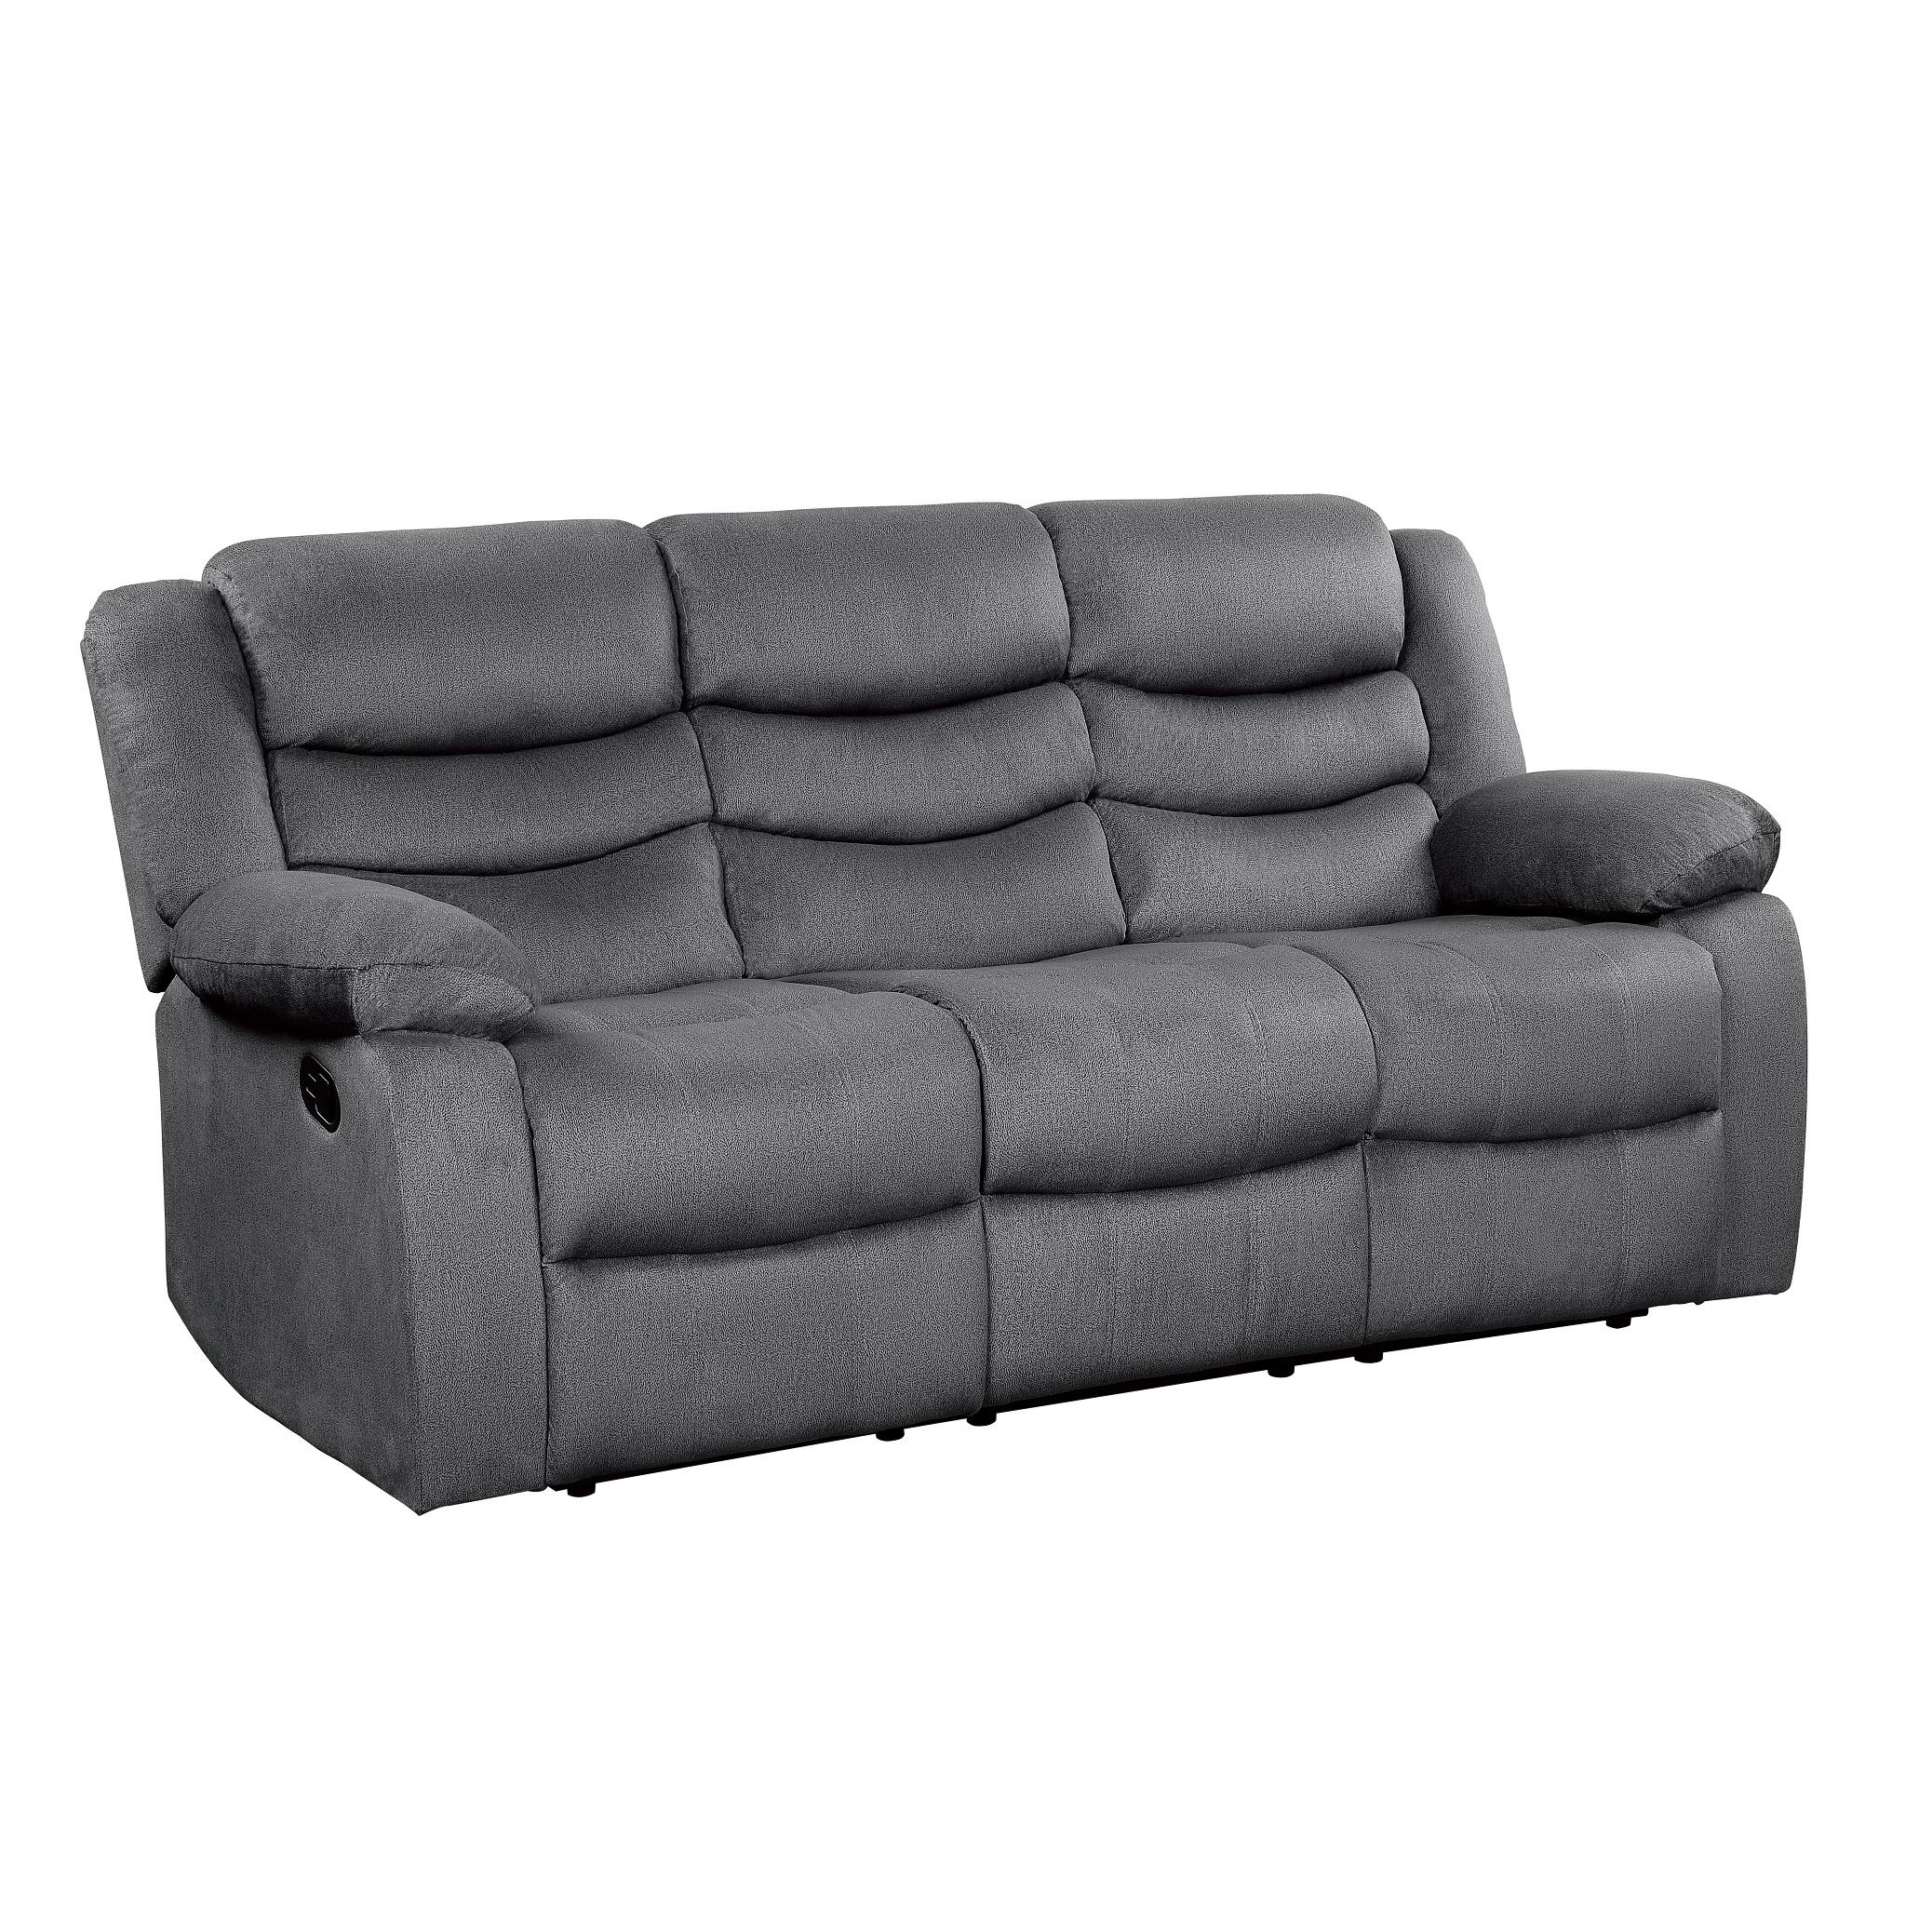 

    
Homelegance 9526GY-3PC Discus Reclining Sofa Set Gray 9526GY-3PC
